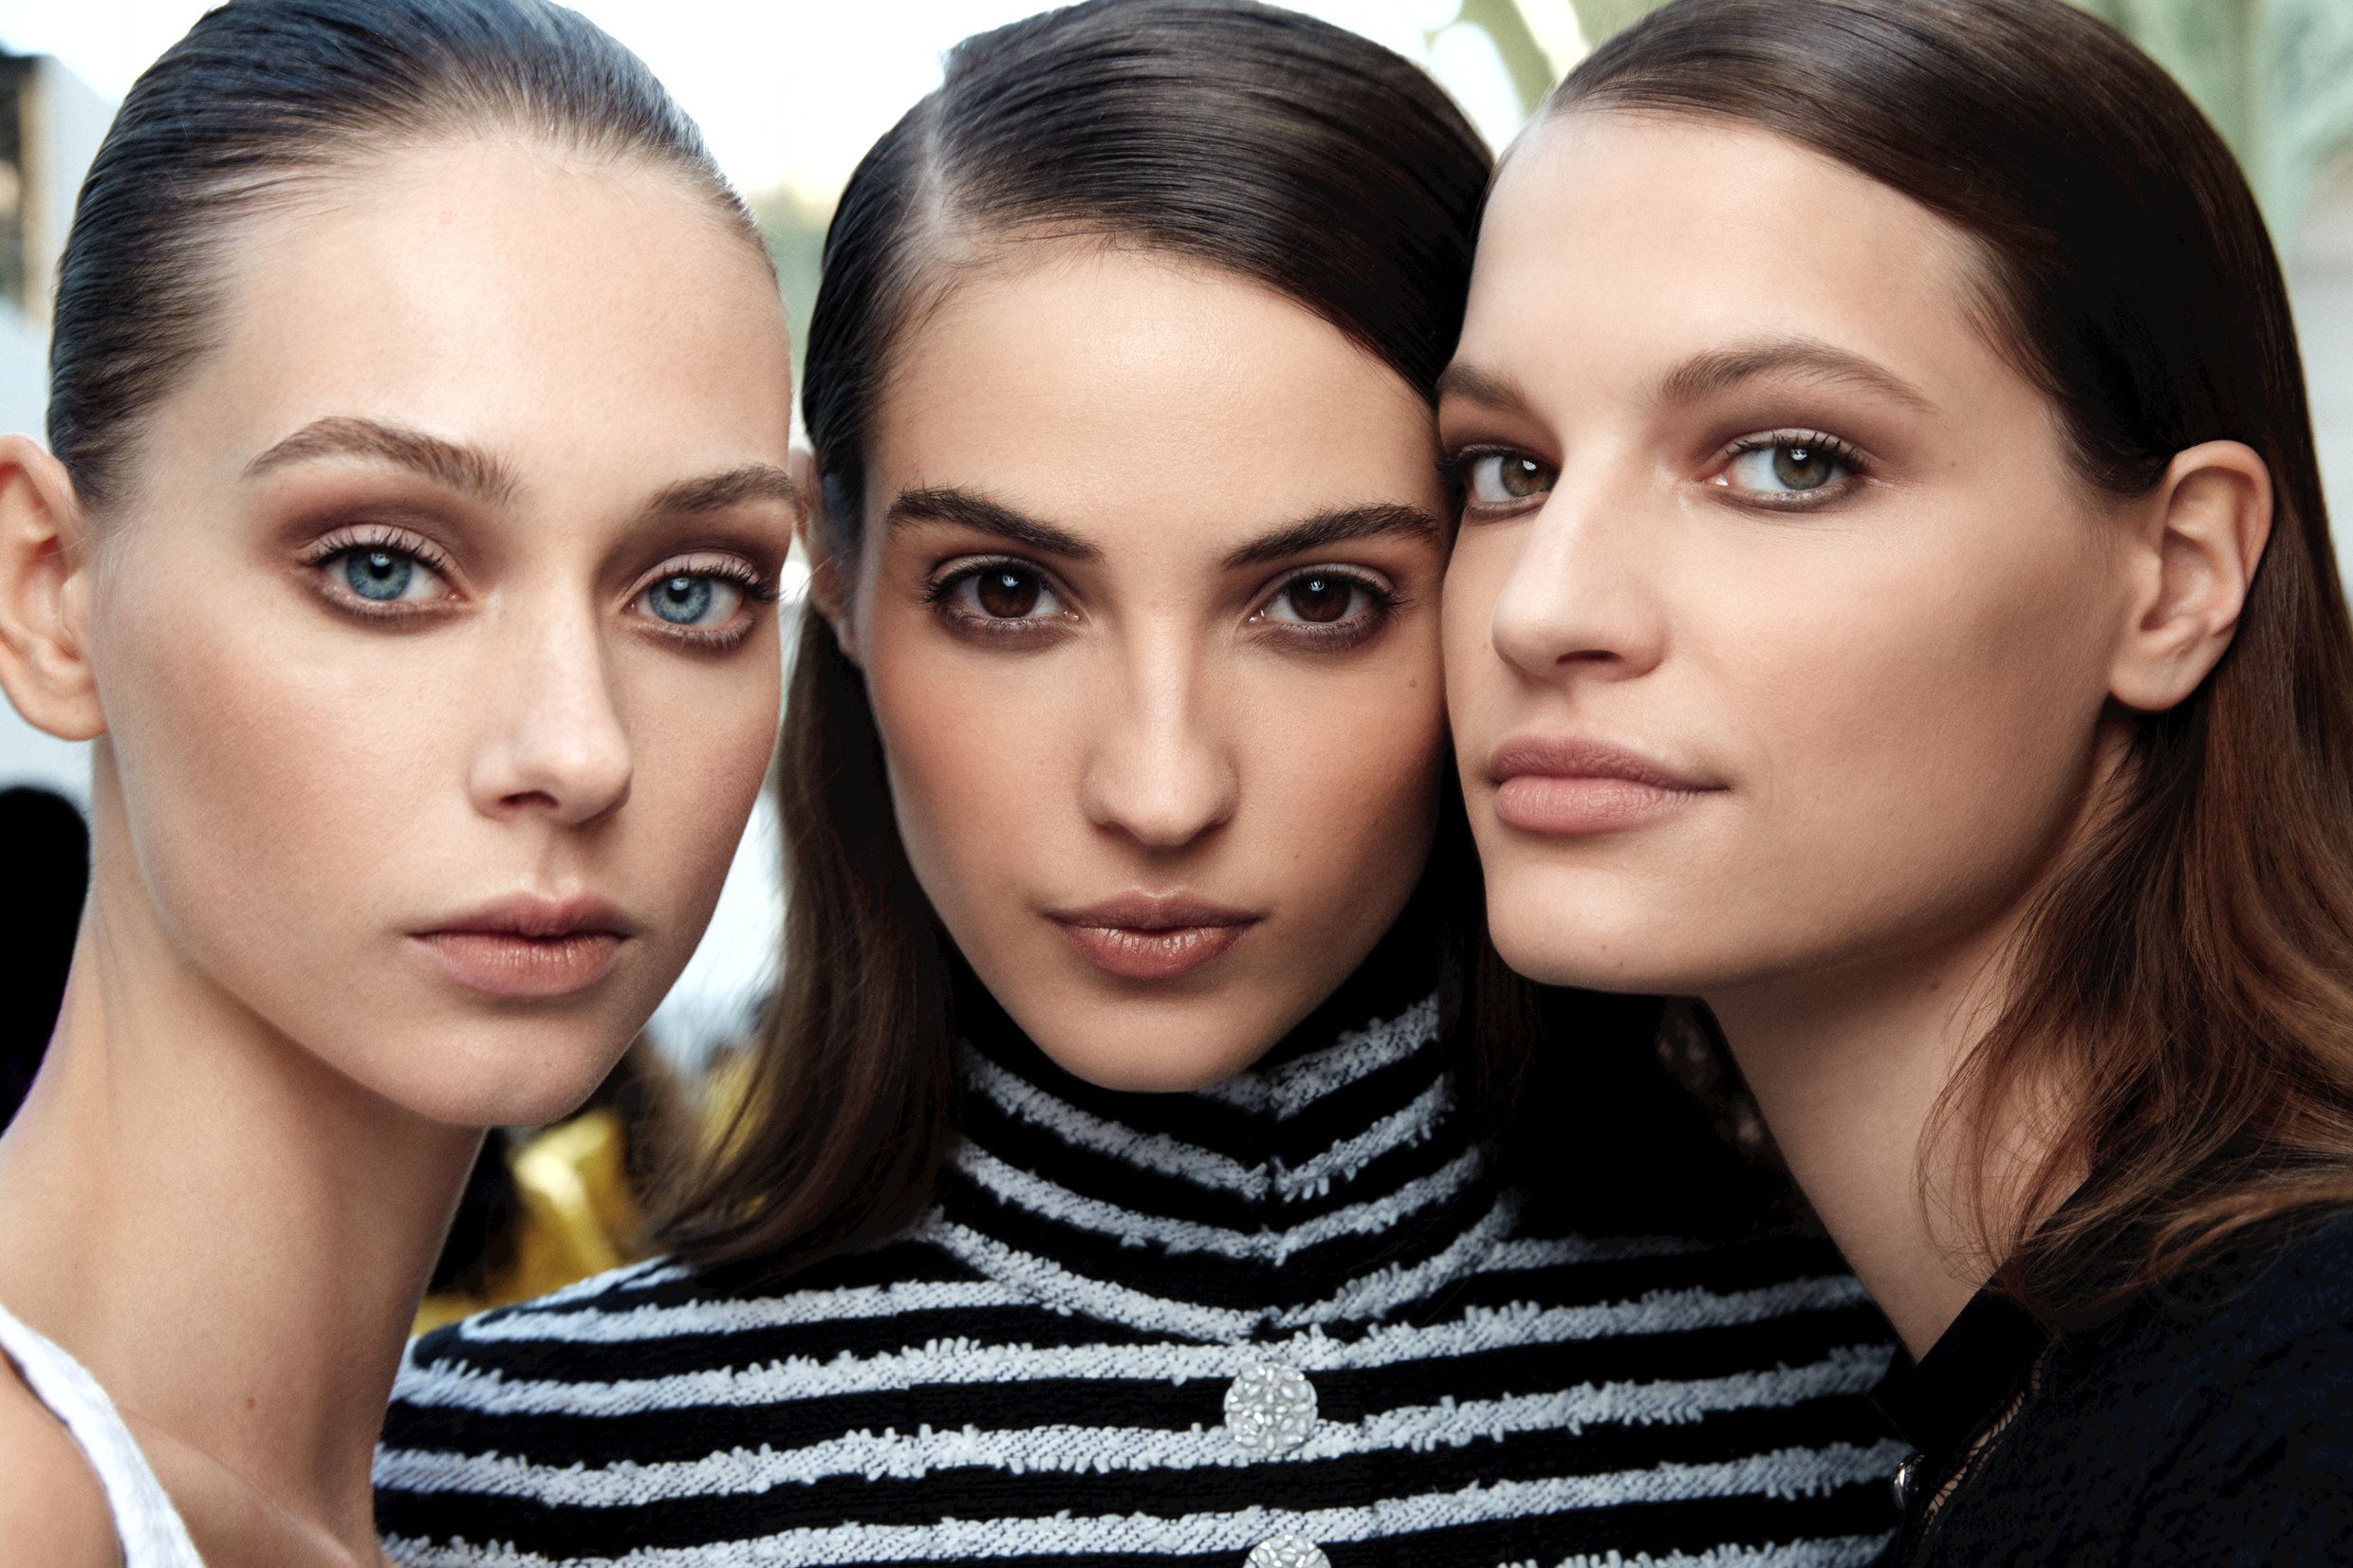 BEAUTY TIPS: BACKSTAGE AT CHANEL